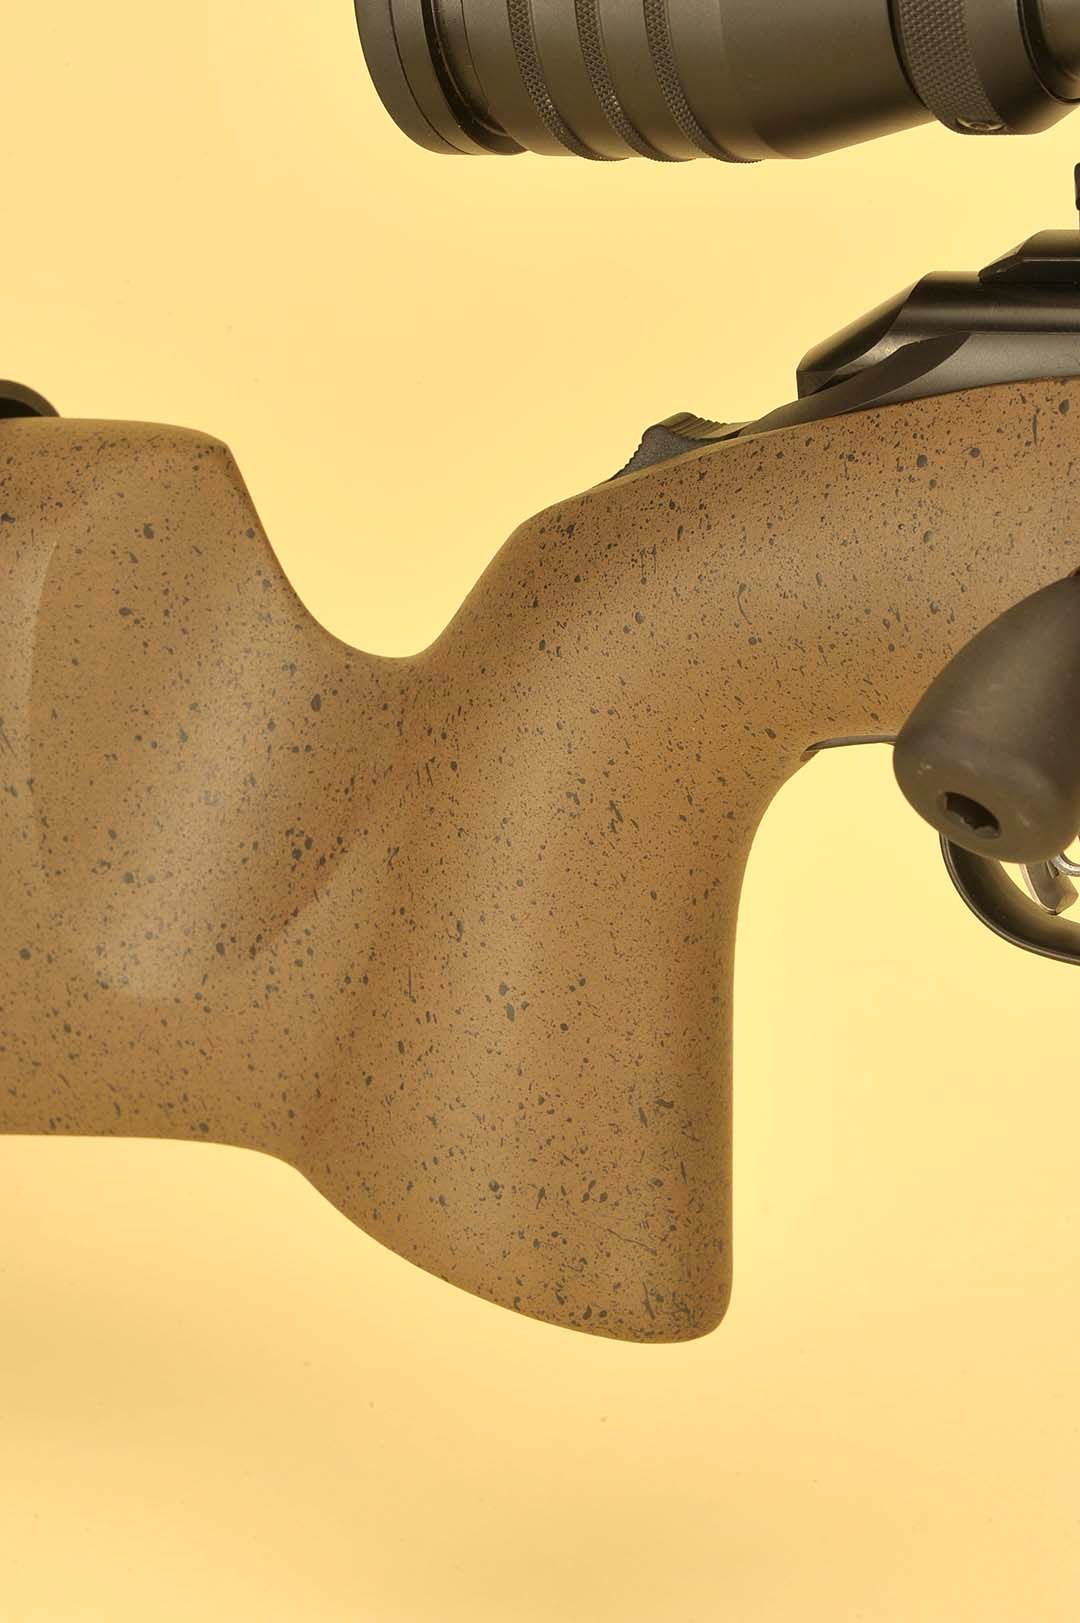 The pistol grip is sharp, but comfortable to shoot regardless of your shooting position. There is a moderate swell on both sides and a wide flair behind it for positioning the hand for shot after shot repeatability downrange.